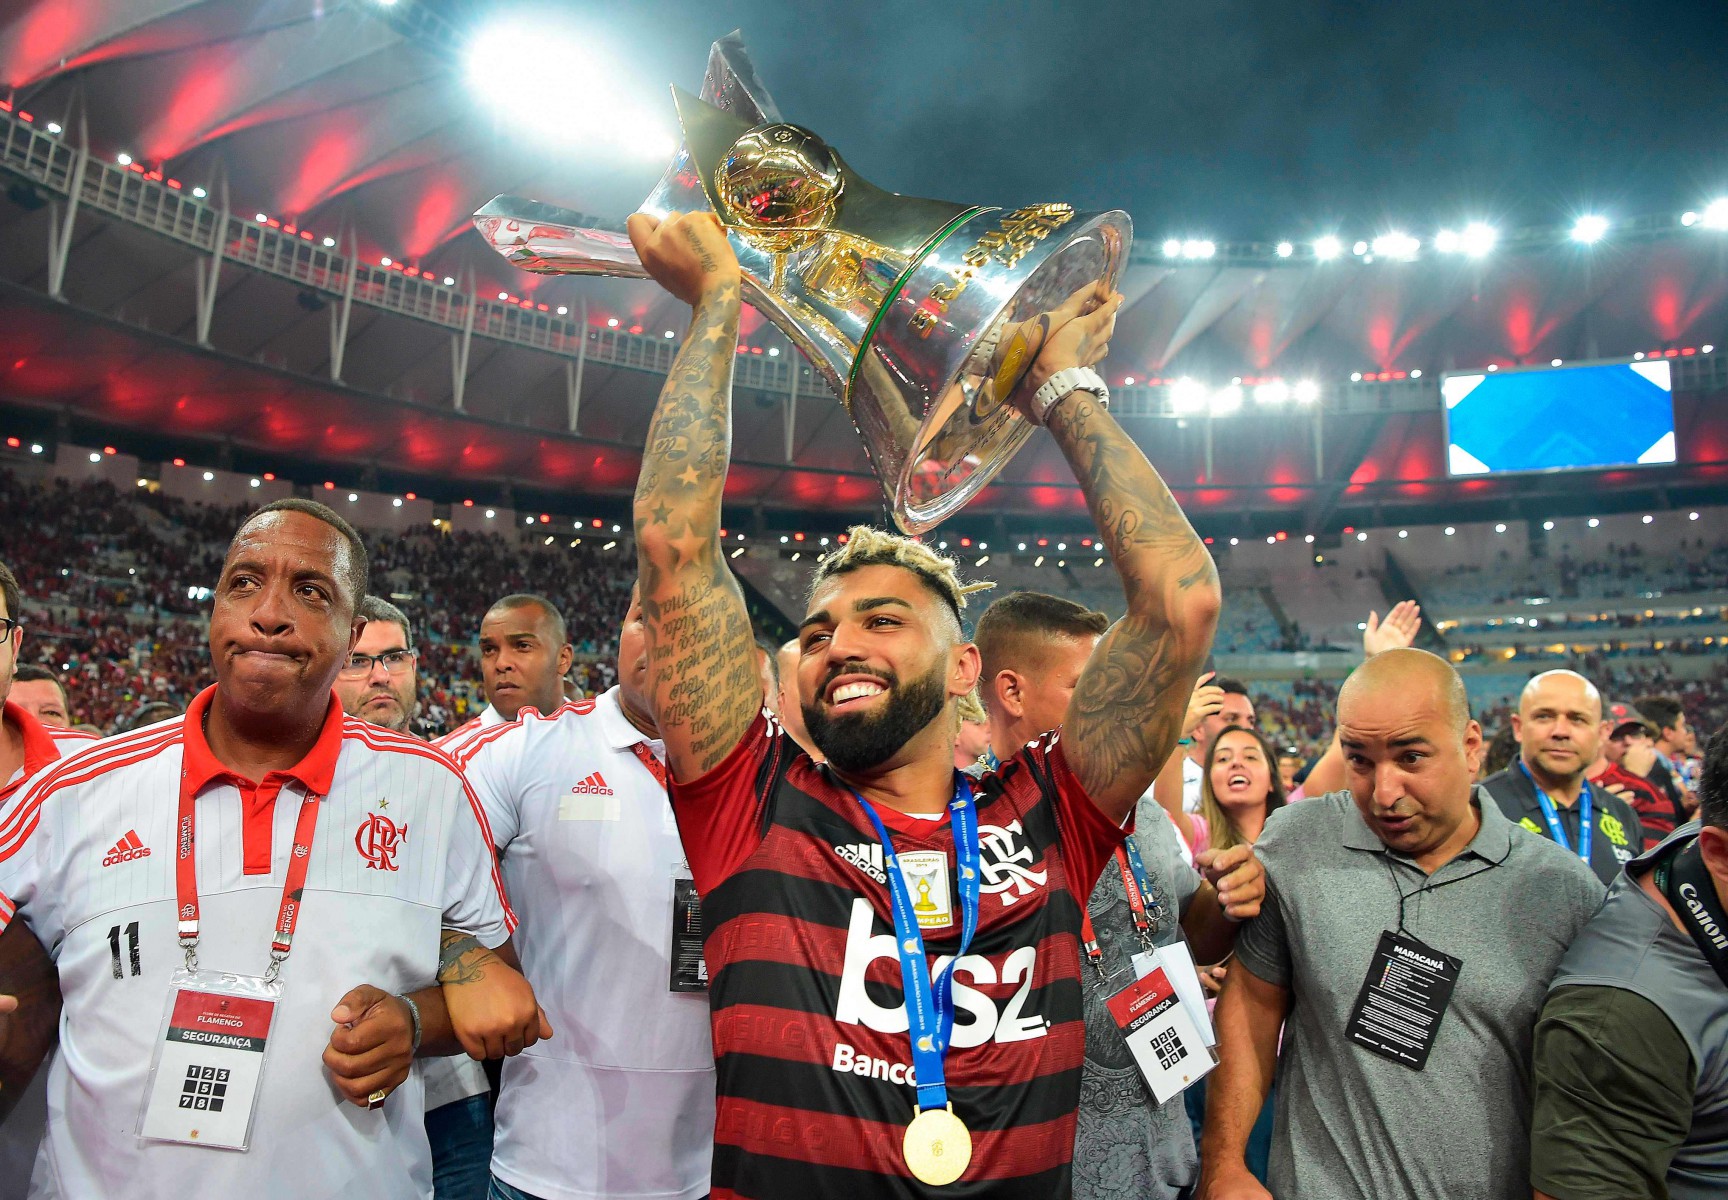 , Chelsea transfer target Gabigol hints hes on the move as 20m Brazil striker says goodbye to Flamengo fans